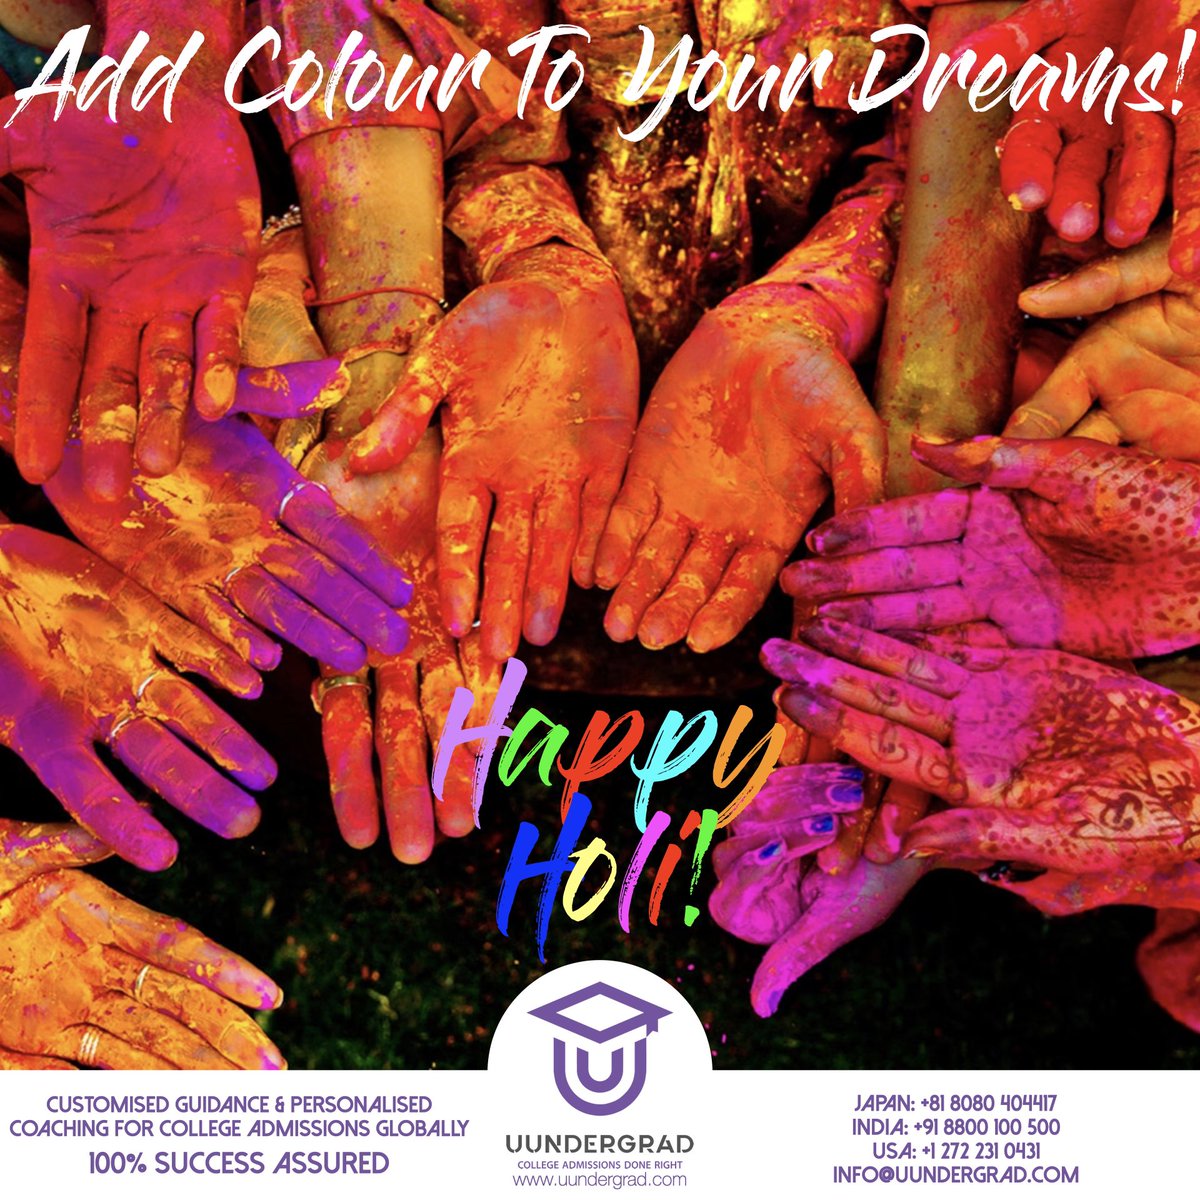 Time to add color your dreams!  

Happy Holi!!

#collegeabroad #admissionabroad #studyabroad